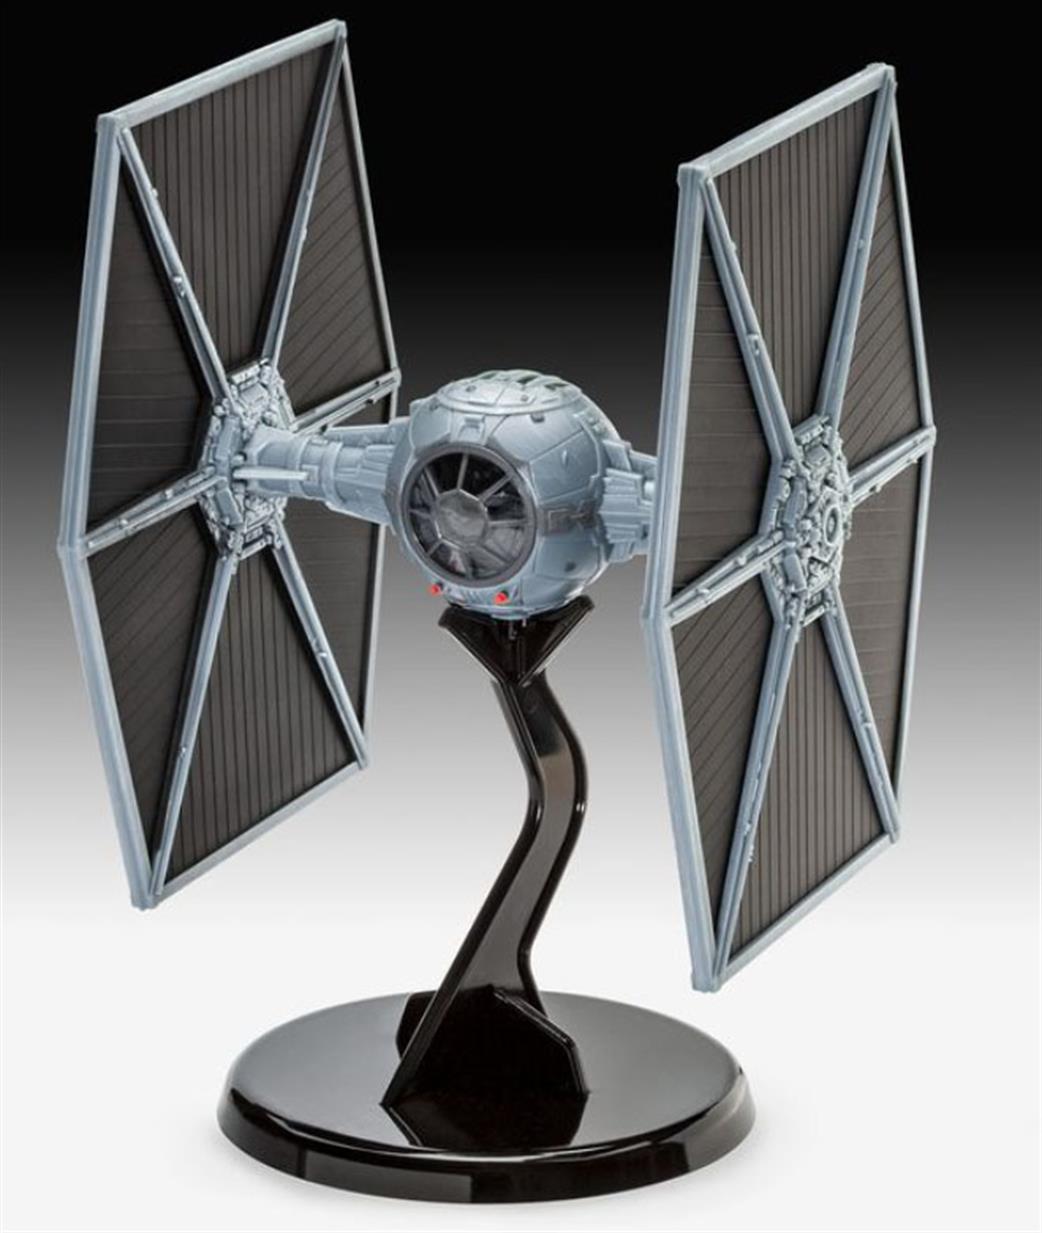 Revell 1/65 06051 Imperial Tie Fighter Kit from Star Wars